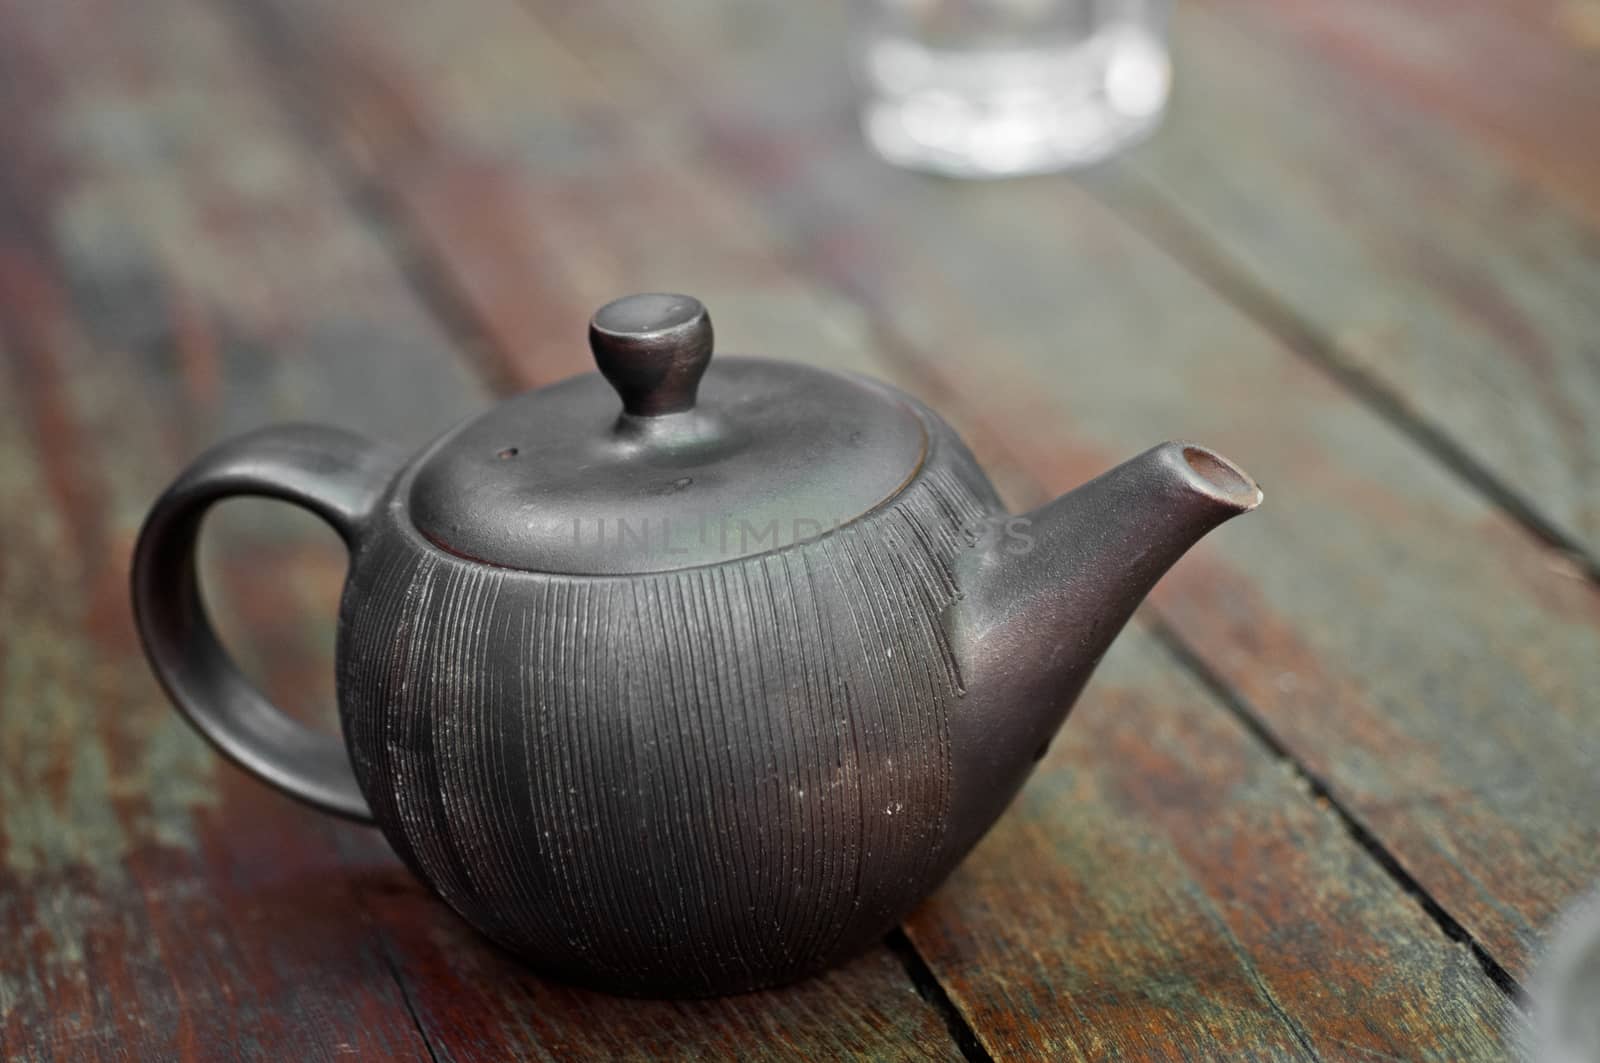 Traditional Chinese tea pot on wooden table by eyeofpaul